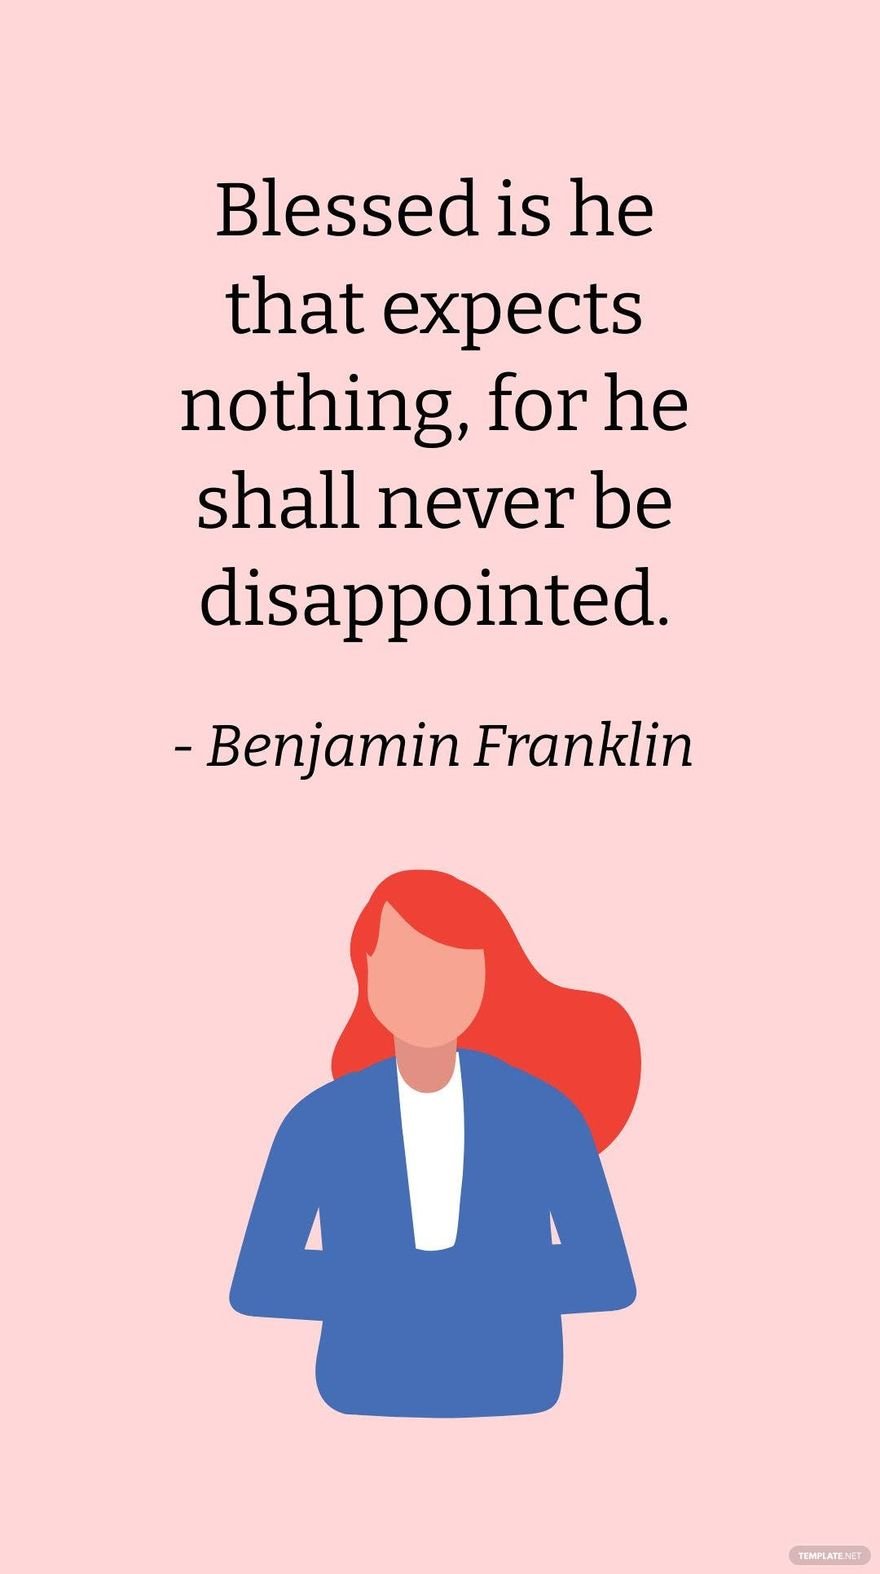 Benjamin Franklin - Blessed is he that expects nothing, for he shall never be disappointed.